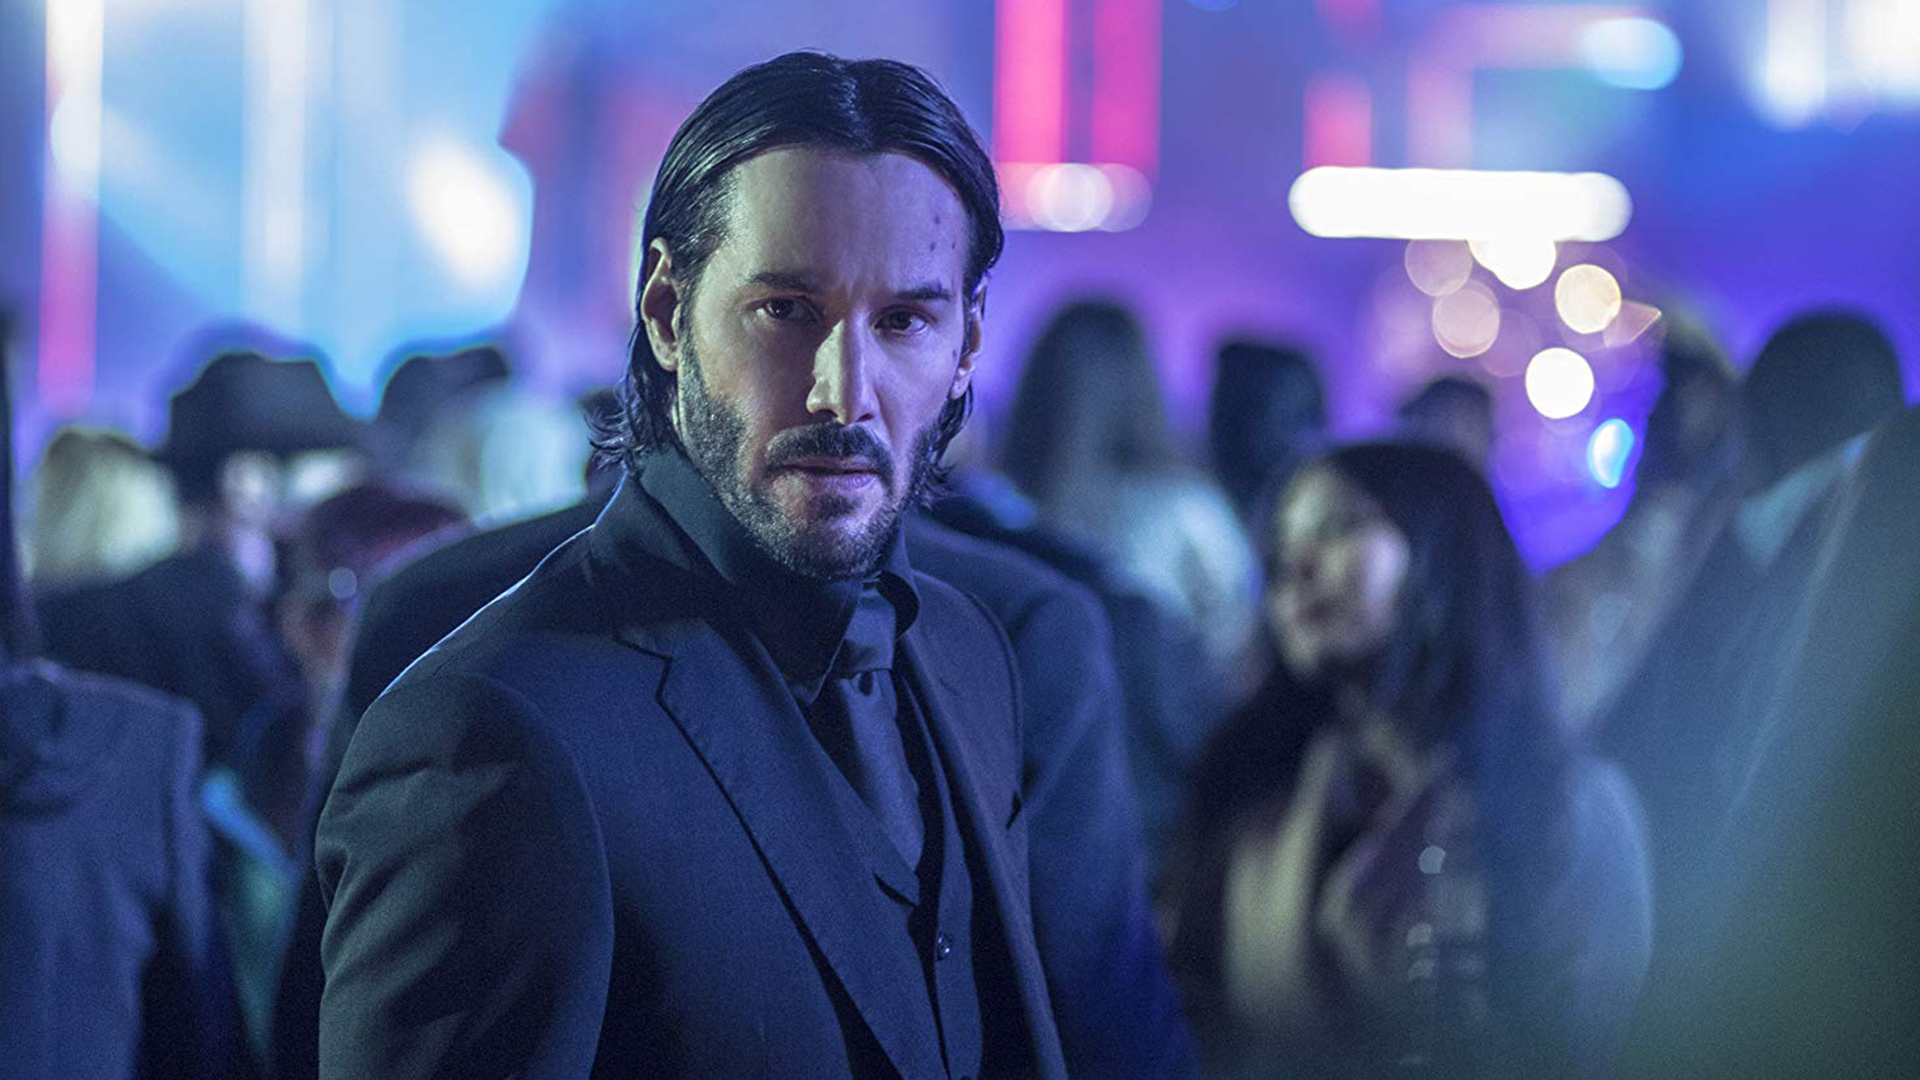 Exclusive: John Wick: Chapter 4 cast interviews with Keanu Reeves, Shamier  Anderson and Hiroyuki Sanada —